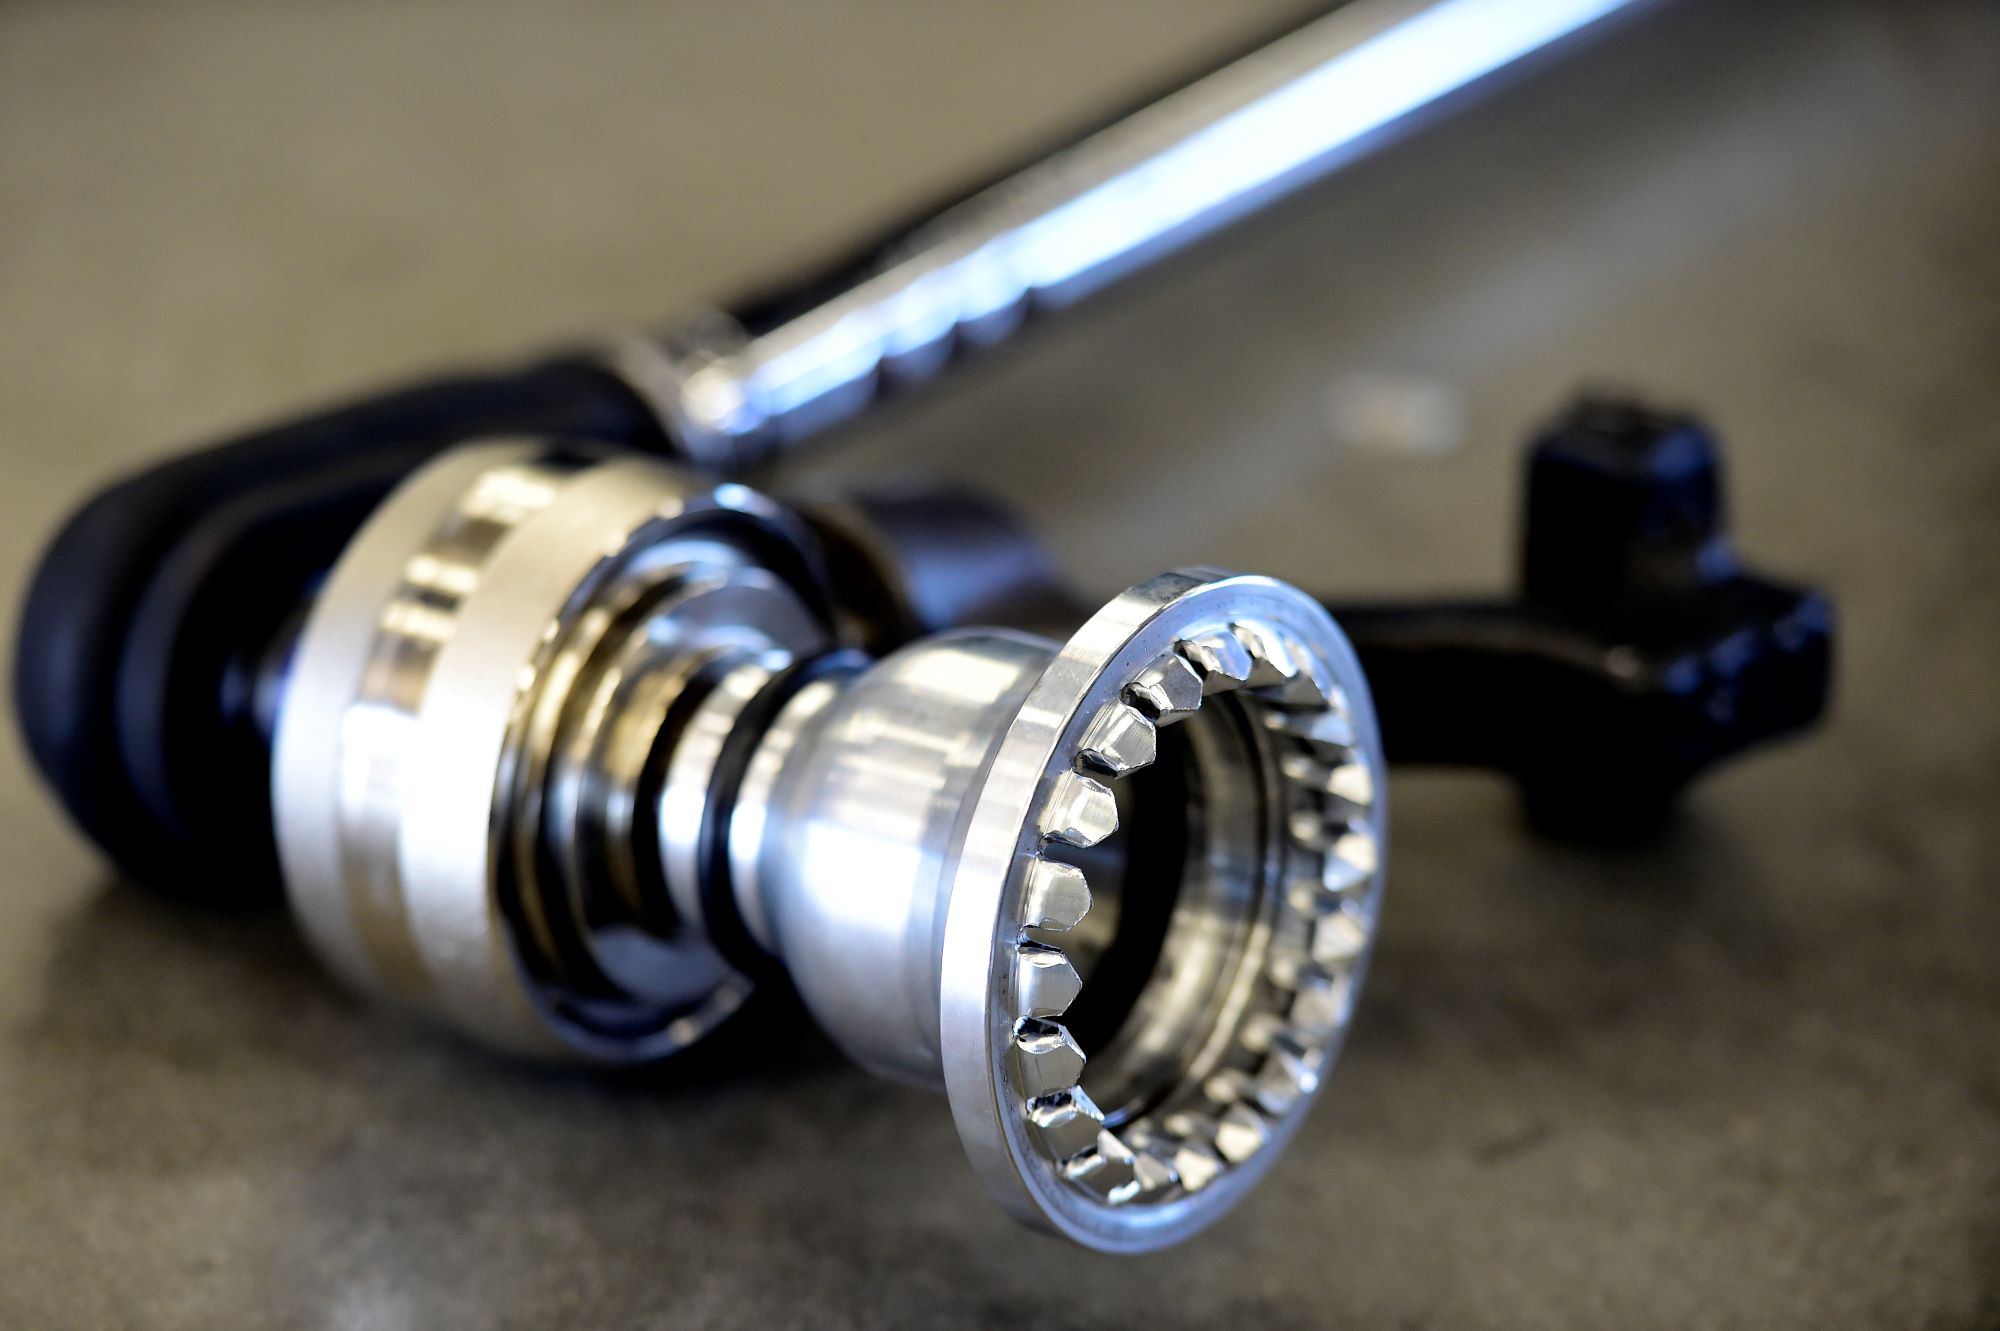 A close up view of a torque wrench.